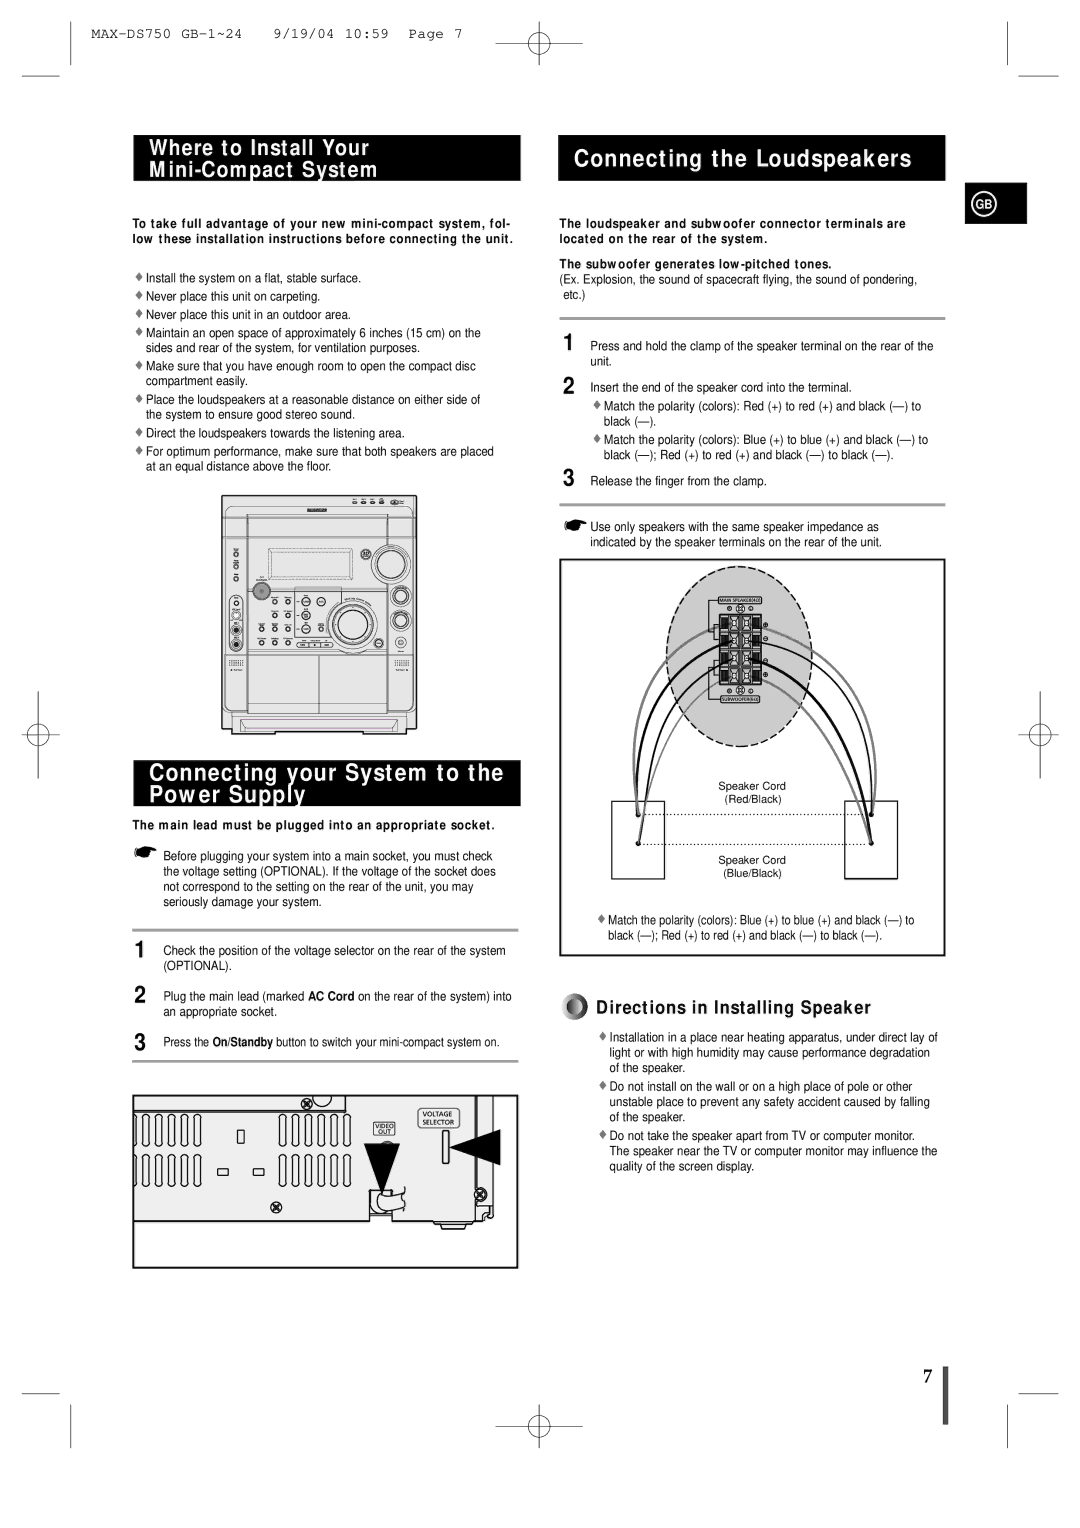 Samsung MAXDS750TH/ESN manual Connecting your System to the Power Supply, Connecting the Loudspeakers 